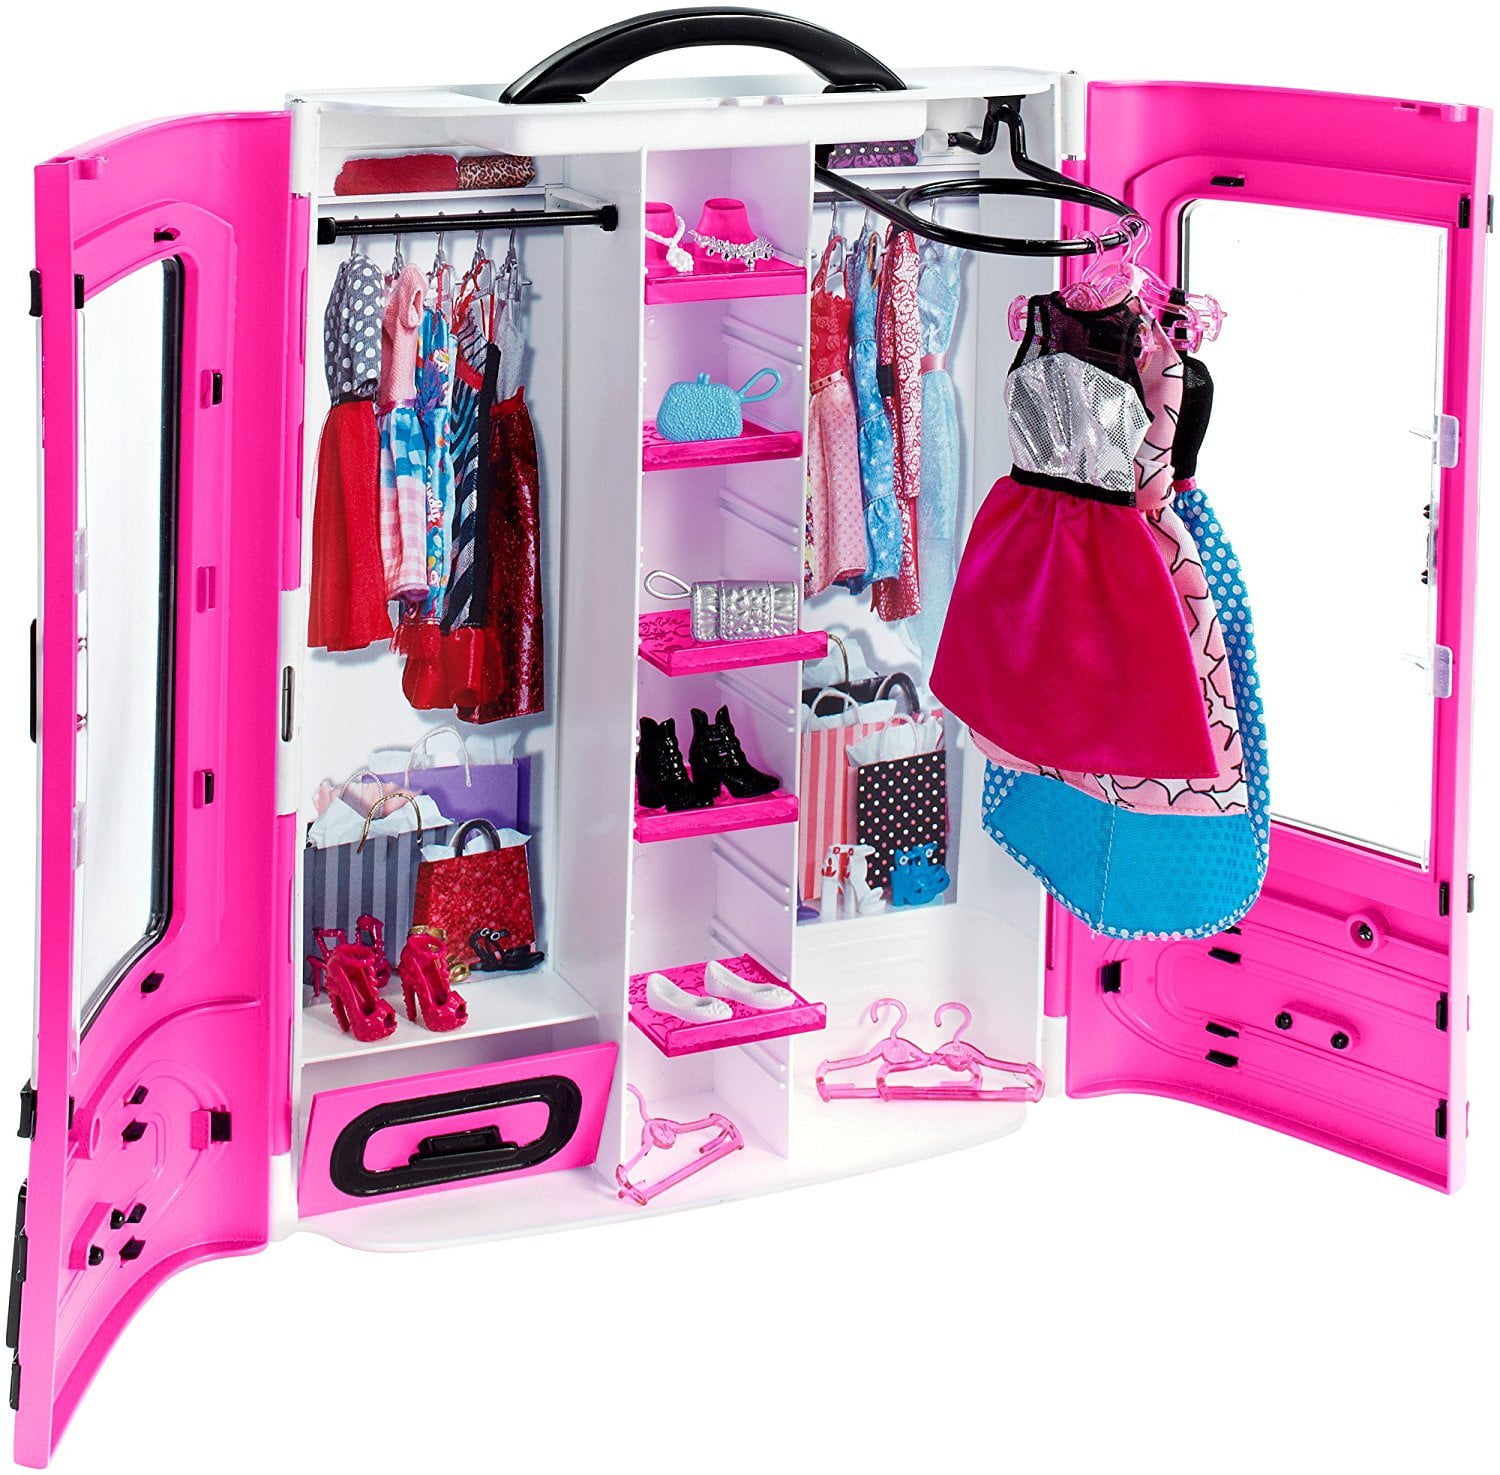 Barbie Style Wardrobe Closet Pink Portable Sparkle Fashion Play Store & Carry! 